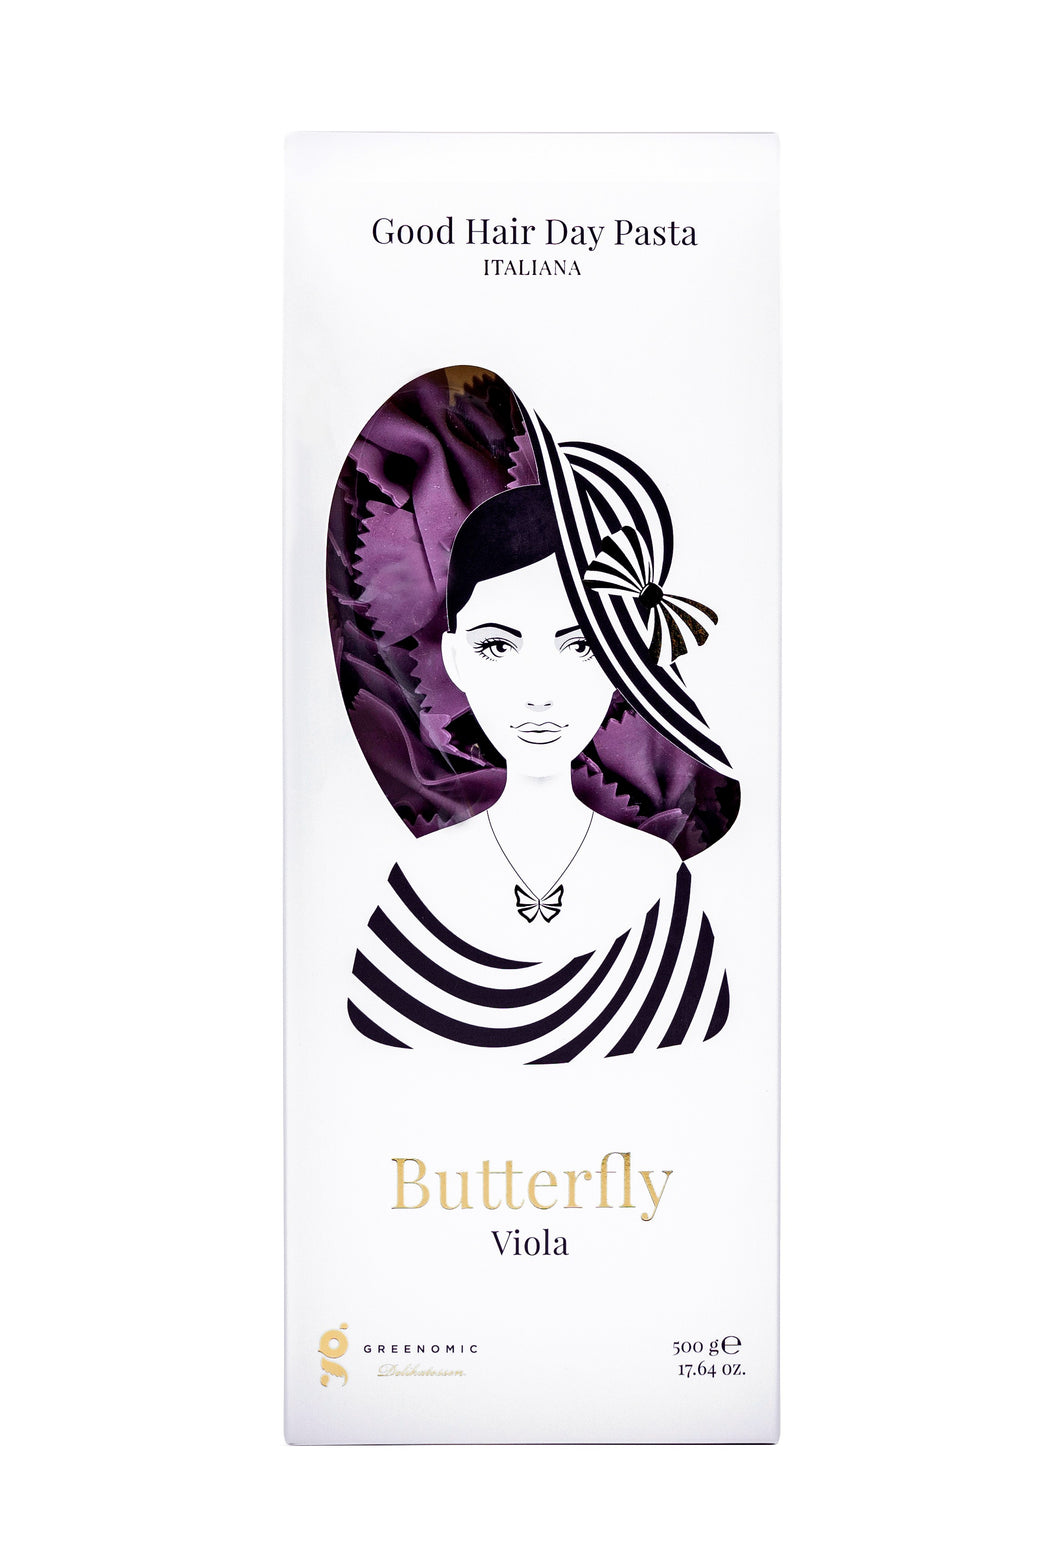 Good Hair Day Pasta - Butterfly Viola